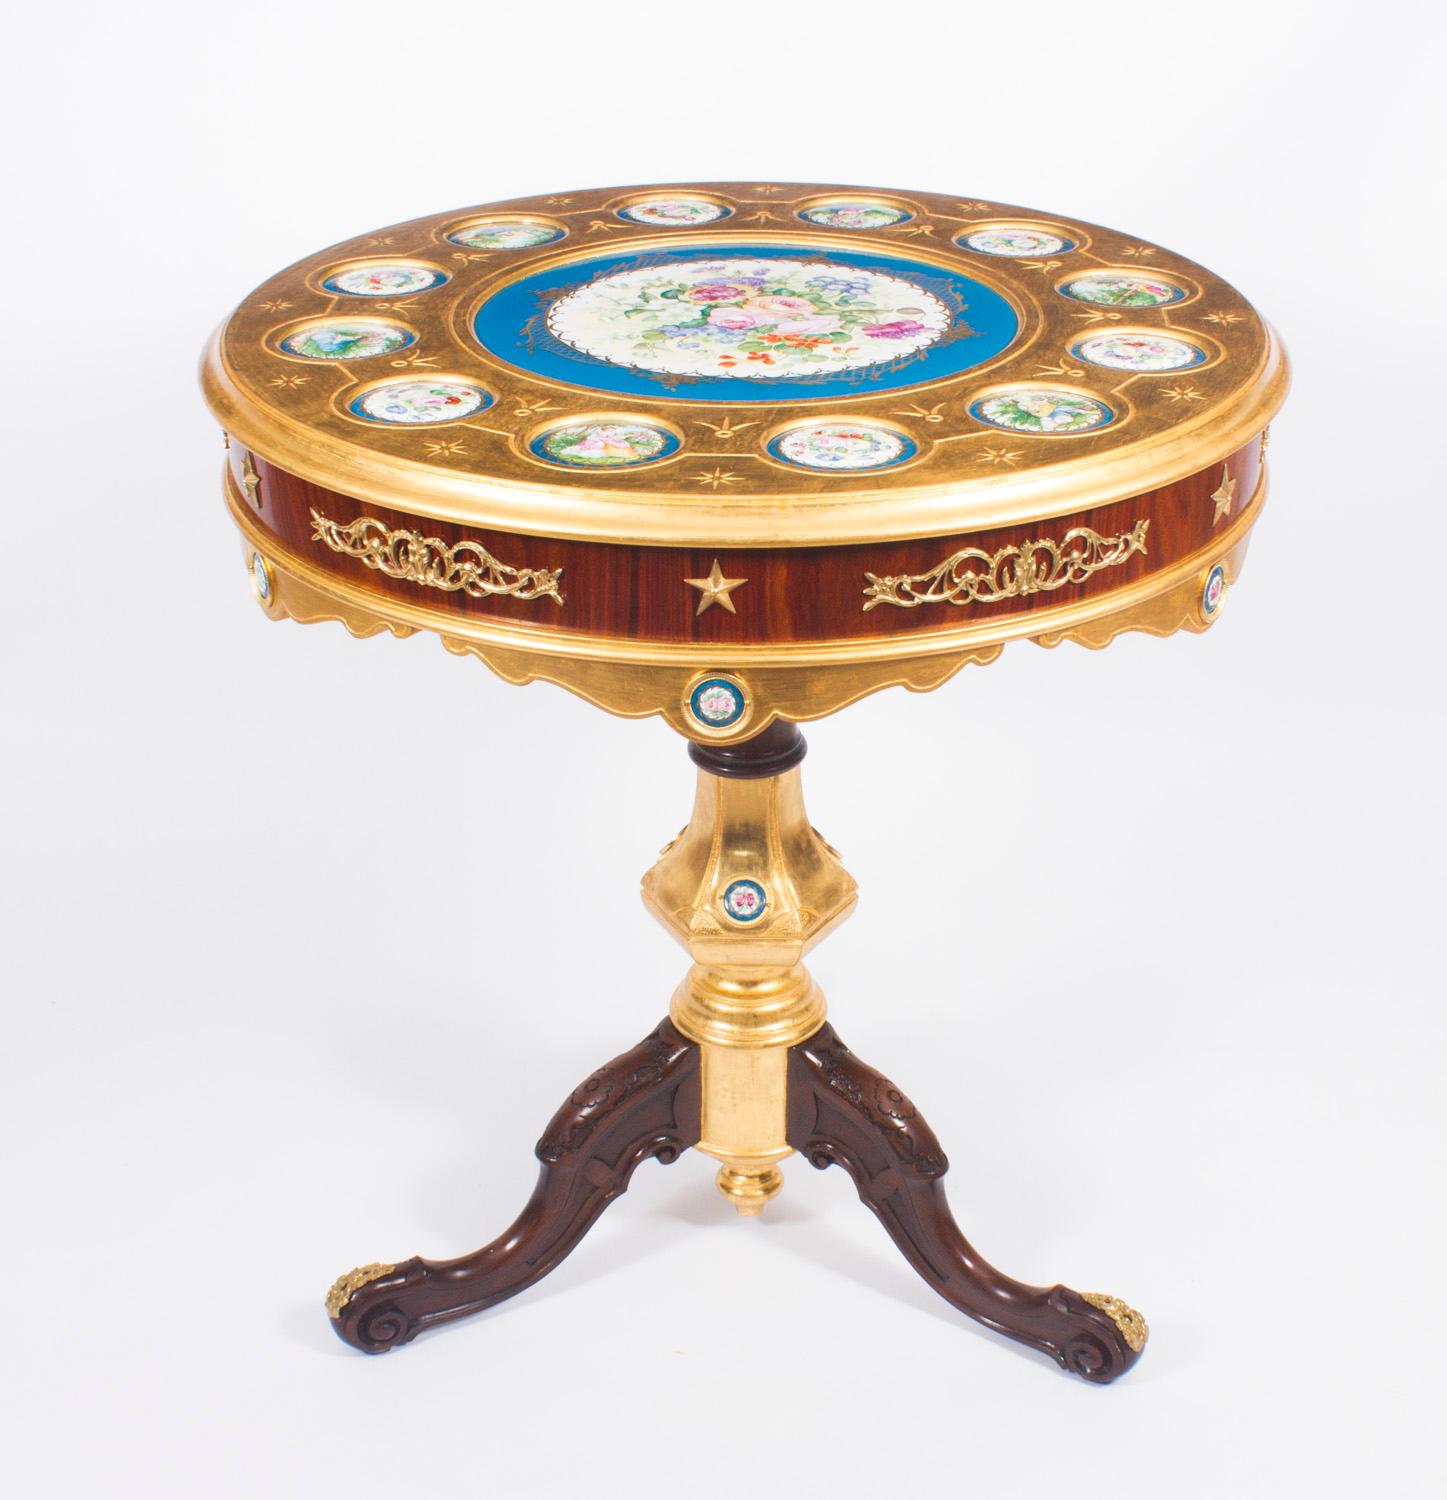 This is an exquisite pair of ormolu and Sevres style porcelain occasional tables in the fabulous Louis XVI manner dating from the late 20th century. 

The circular gilded tops are each inset with a large central Sevre style porcelain plaque,